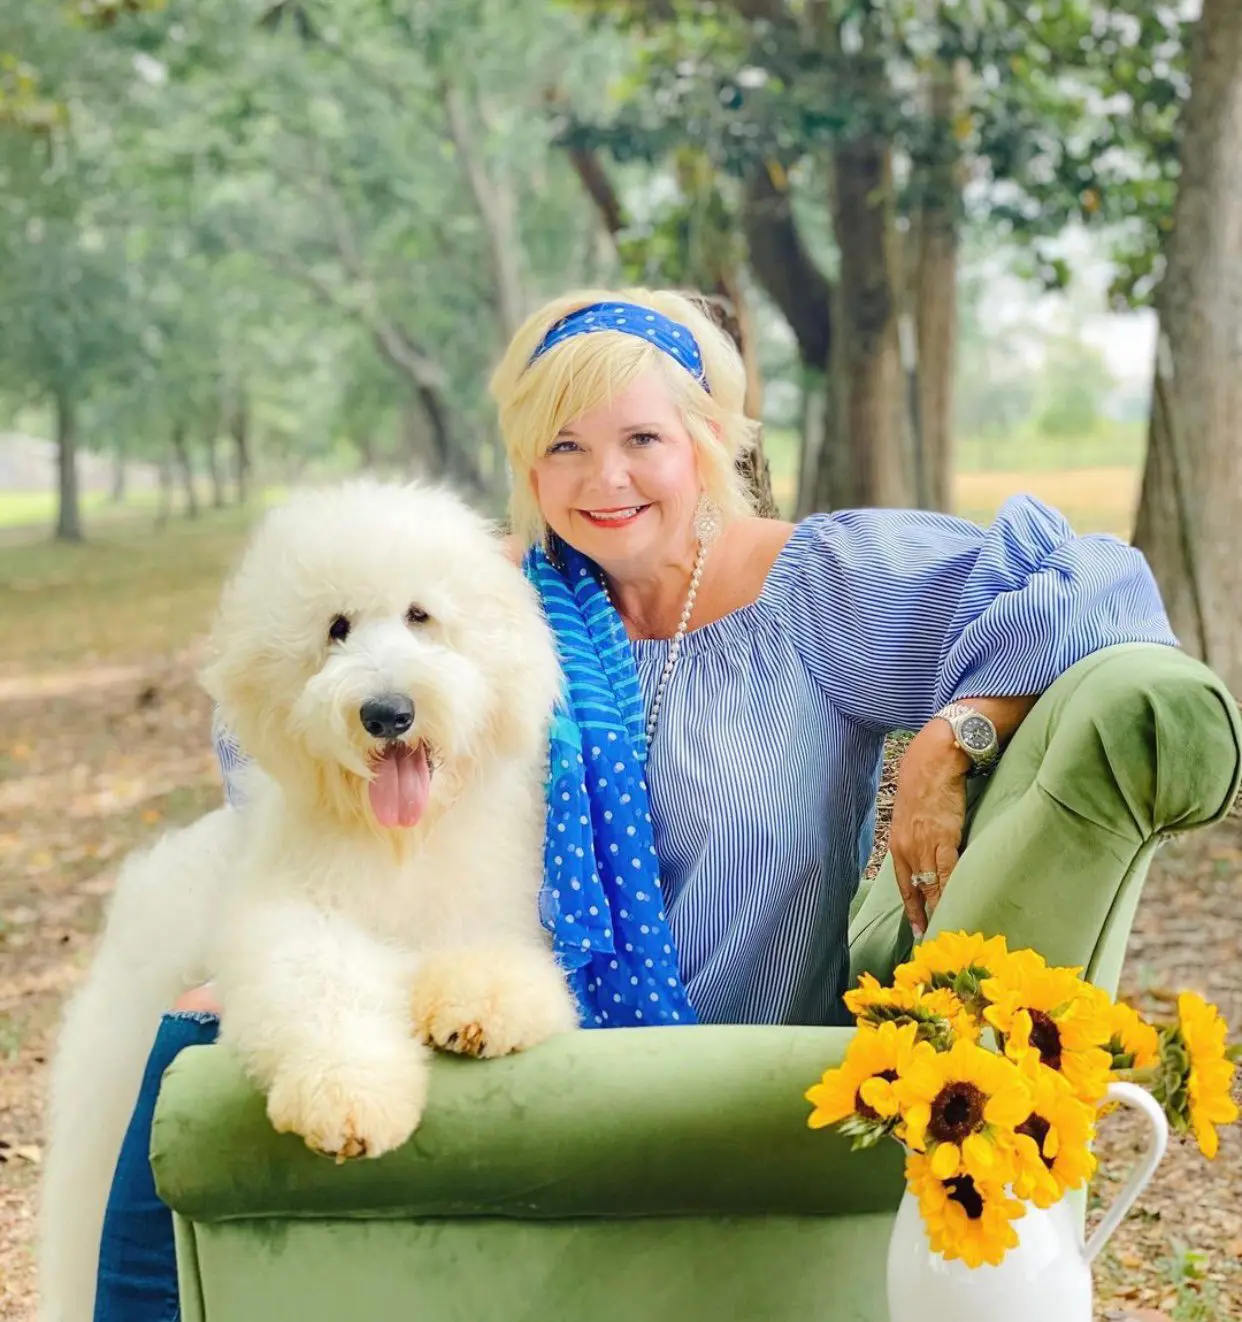 a medium f1b ultra cream English teddy bear golden doodle posing on a green couch with flowers and with owner Sherri Smeraglia